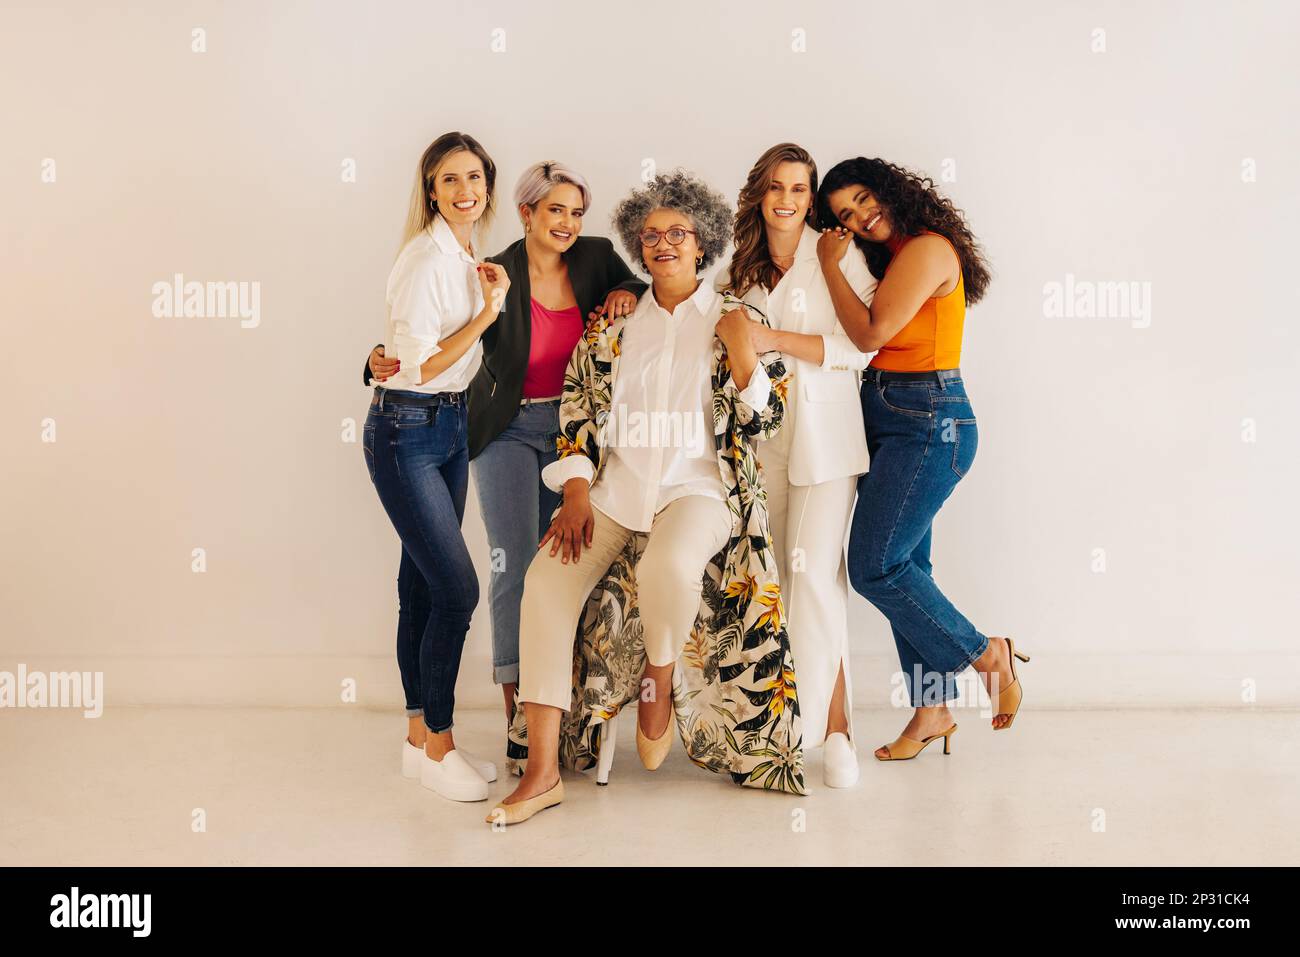 Woman-owned startup. Multicultural businesswomen smiling at the camera while standing together against a wall. Group of successful businesswomen worki Stock Photo